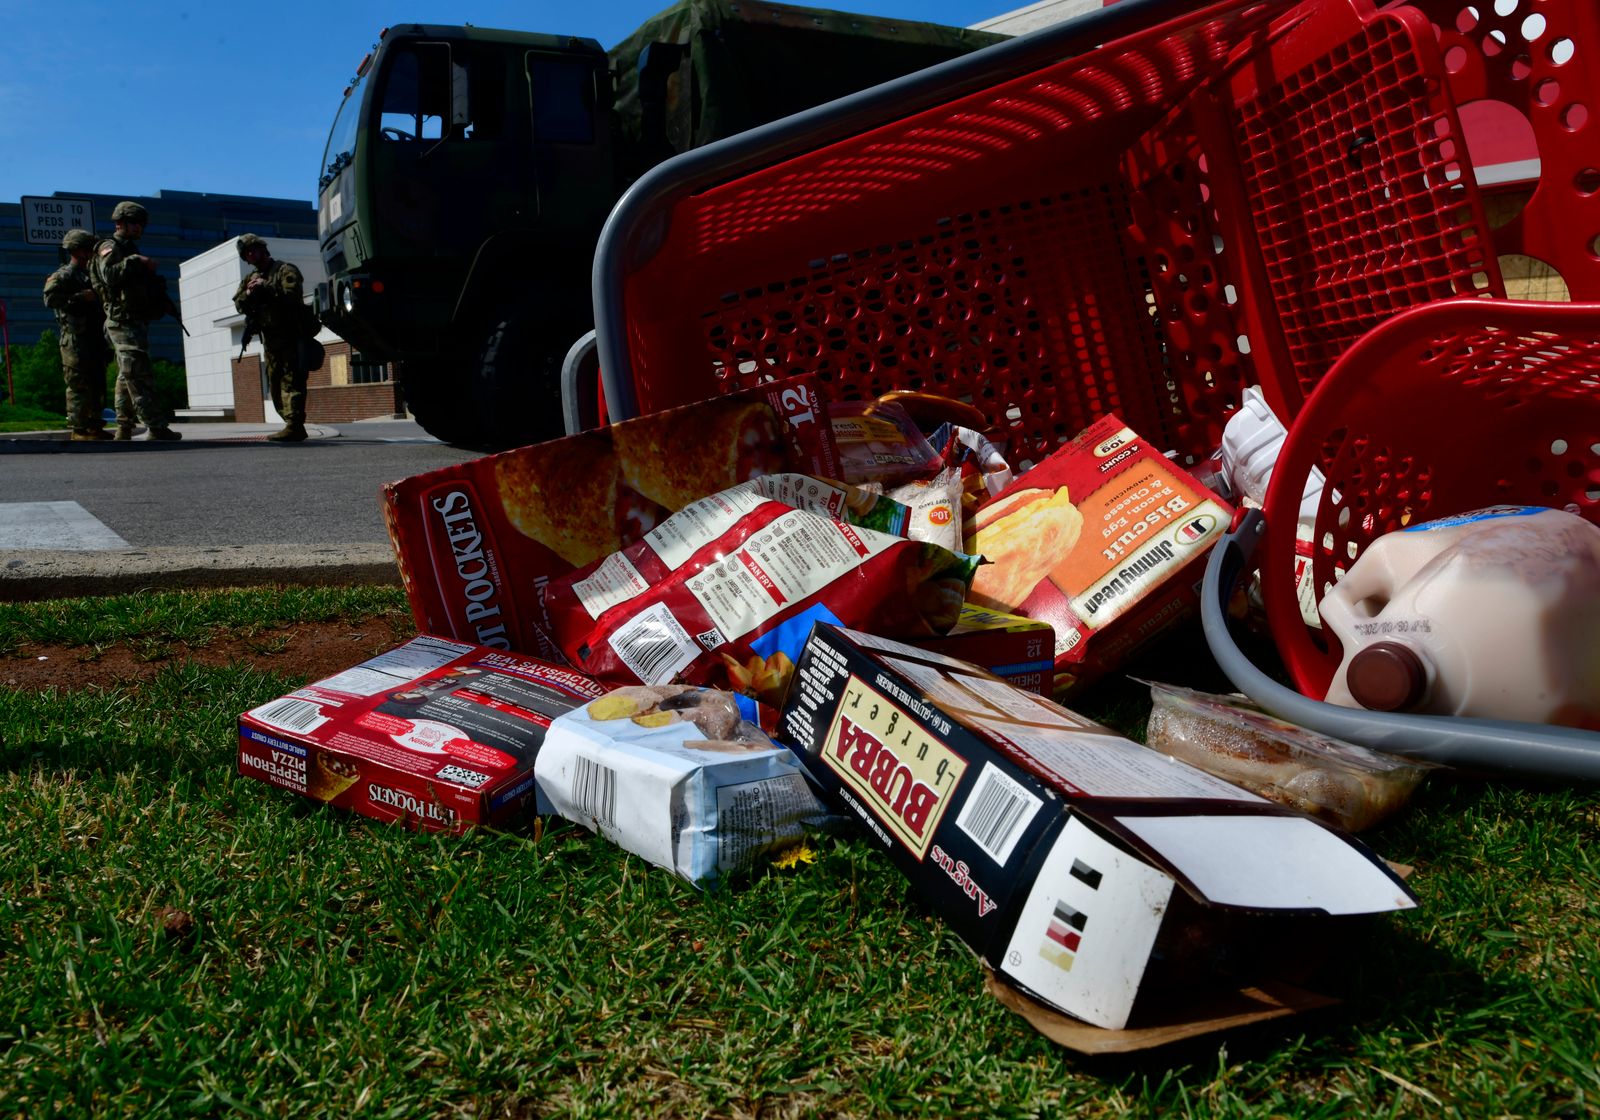 An overturn red shopping cart with food strewn on the ground